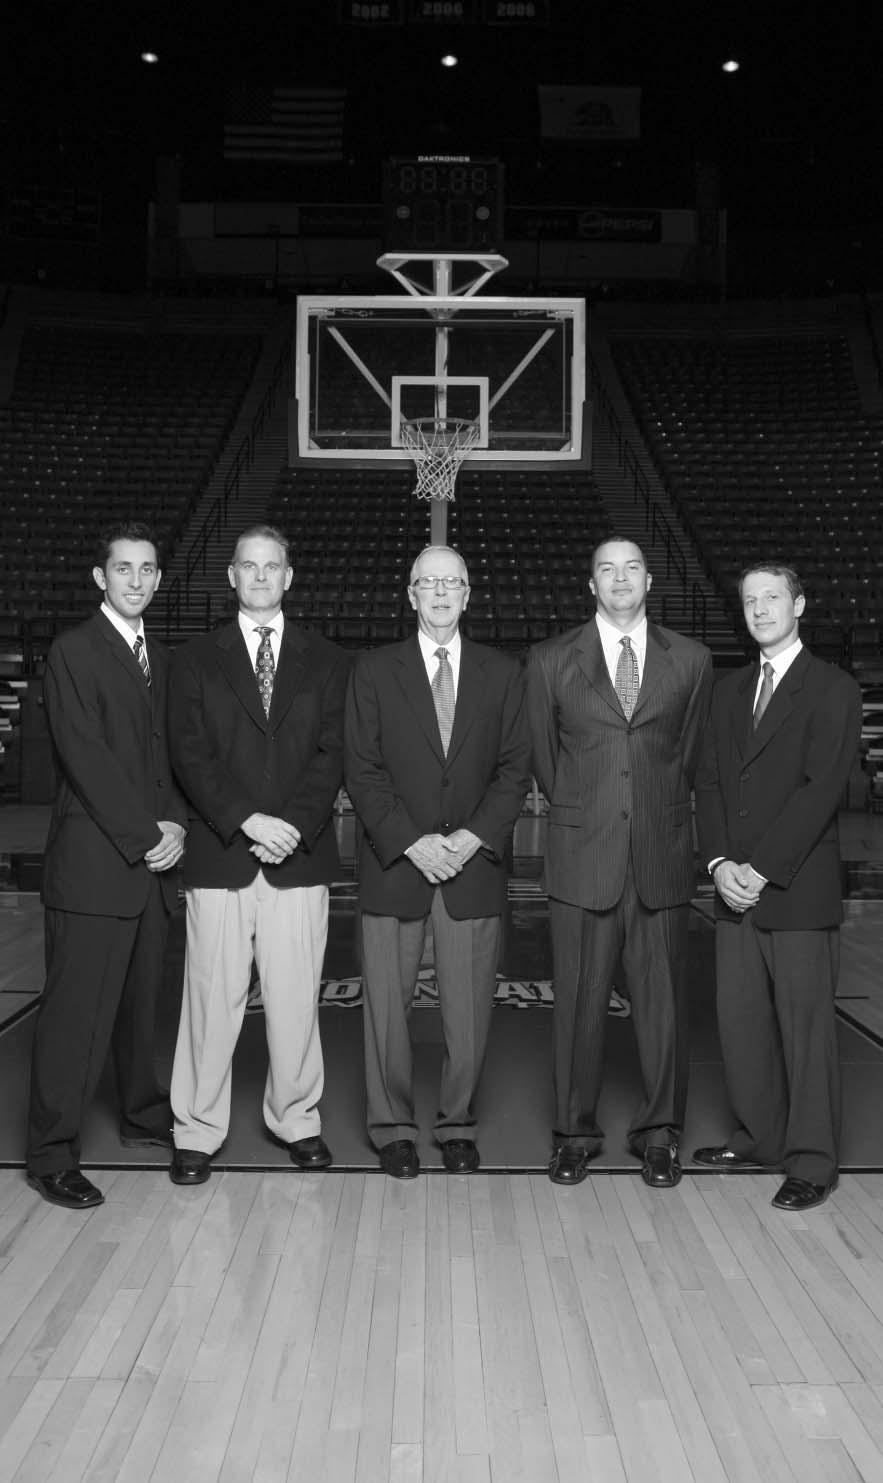 Aztec Coaches 2002 NCAA TOURNAMENT 2003 NIT 2006 NCAA TOURNAMENT 2007 NIT Steve Fisher and his basketball staff look to guide the Aztecs to the postseason for a third